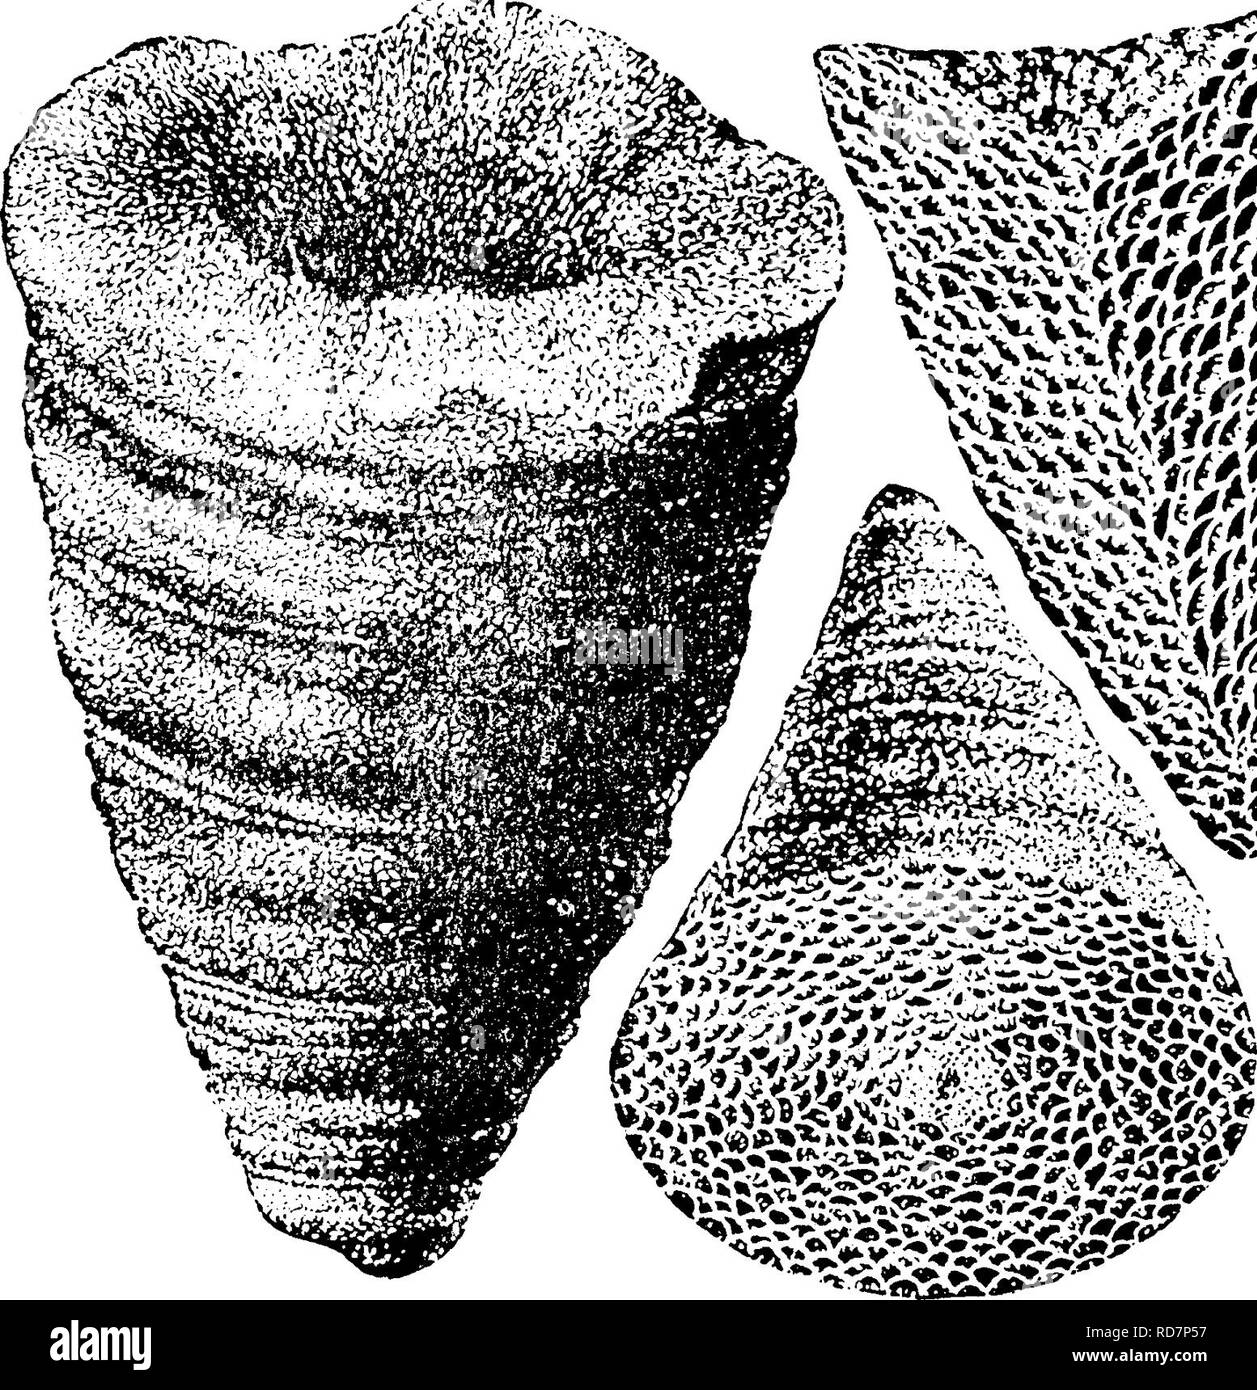 . A dictionary of the fossils of Pennsylvania and neighboring states named in the reports and catalogues of the survey ... Paleontology. ind. l^i. 1882.) Collett's Indiana Rt. of 1882, page 304, plate 28, figs. 3, 4. Grows and looks (near its edge) like a Chonophyllum.— Corniferous limestone. Falls of the Ohio. VIII a. Cystiphyllum niagarense. Compare Cyst, granilineatum of the Corniferous^ above.— Vh. Cystiphyllum cystalatum. (Hall, 1882, Foss. Corals of Niagara and U. Helder- berg, p. 58) Collett's In- diana report of 1882,page 262, plate 9, figs. 3, 'side view, natur- al size ; fig. 4, cros Stock Photo